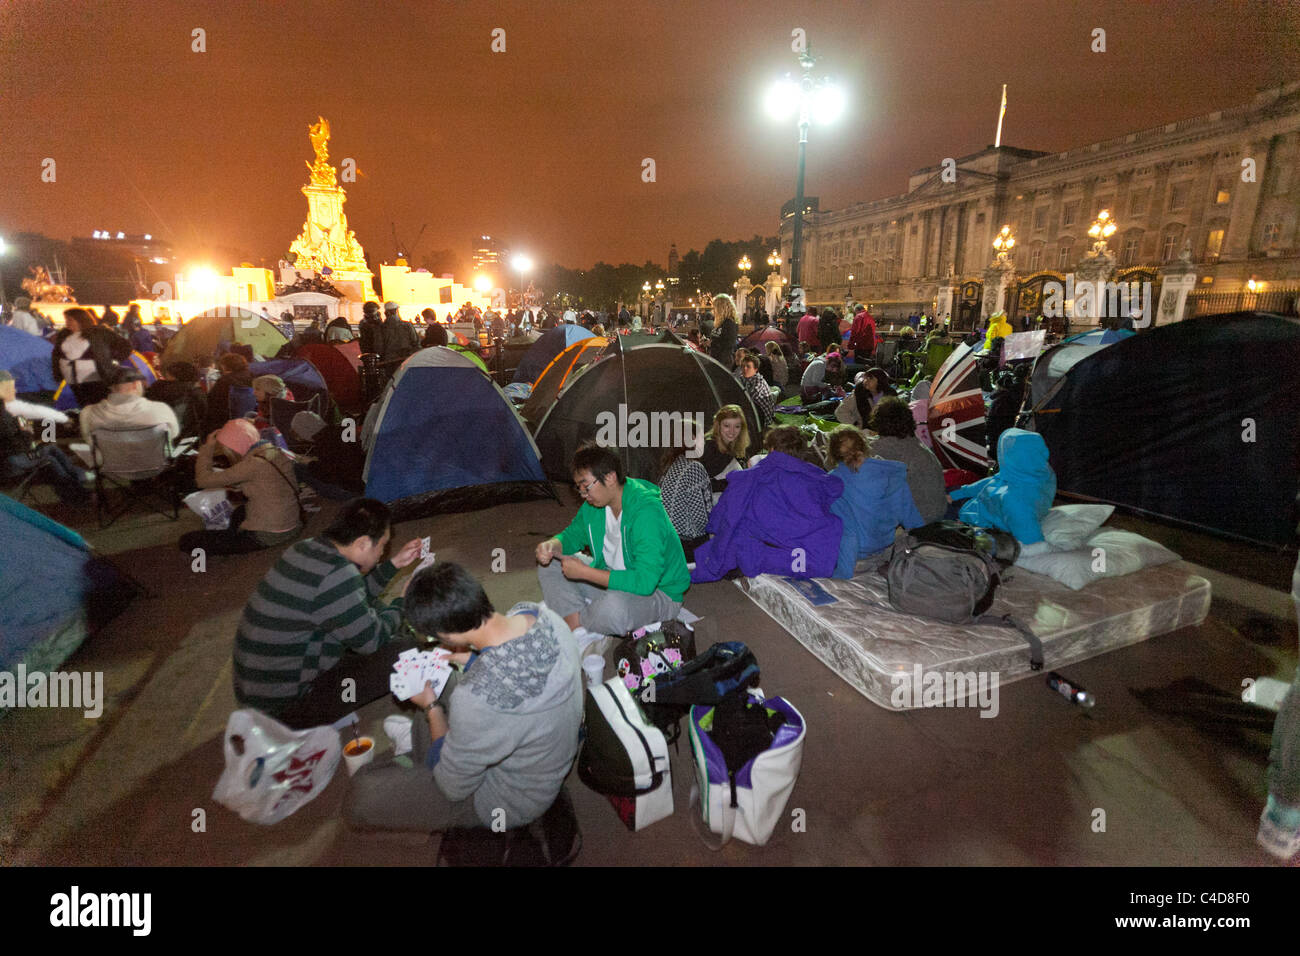 Festive crowds camping out in front of Buckingham Palace the night before the royal wedding of Prince William and Kate Middleton Stock Photo